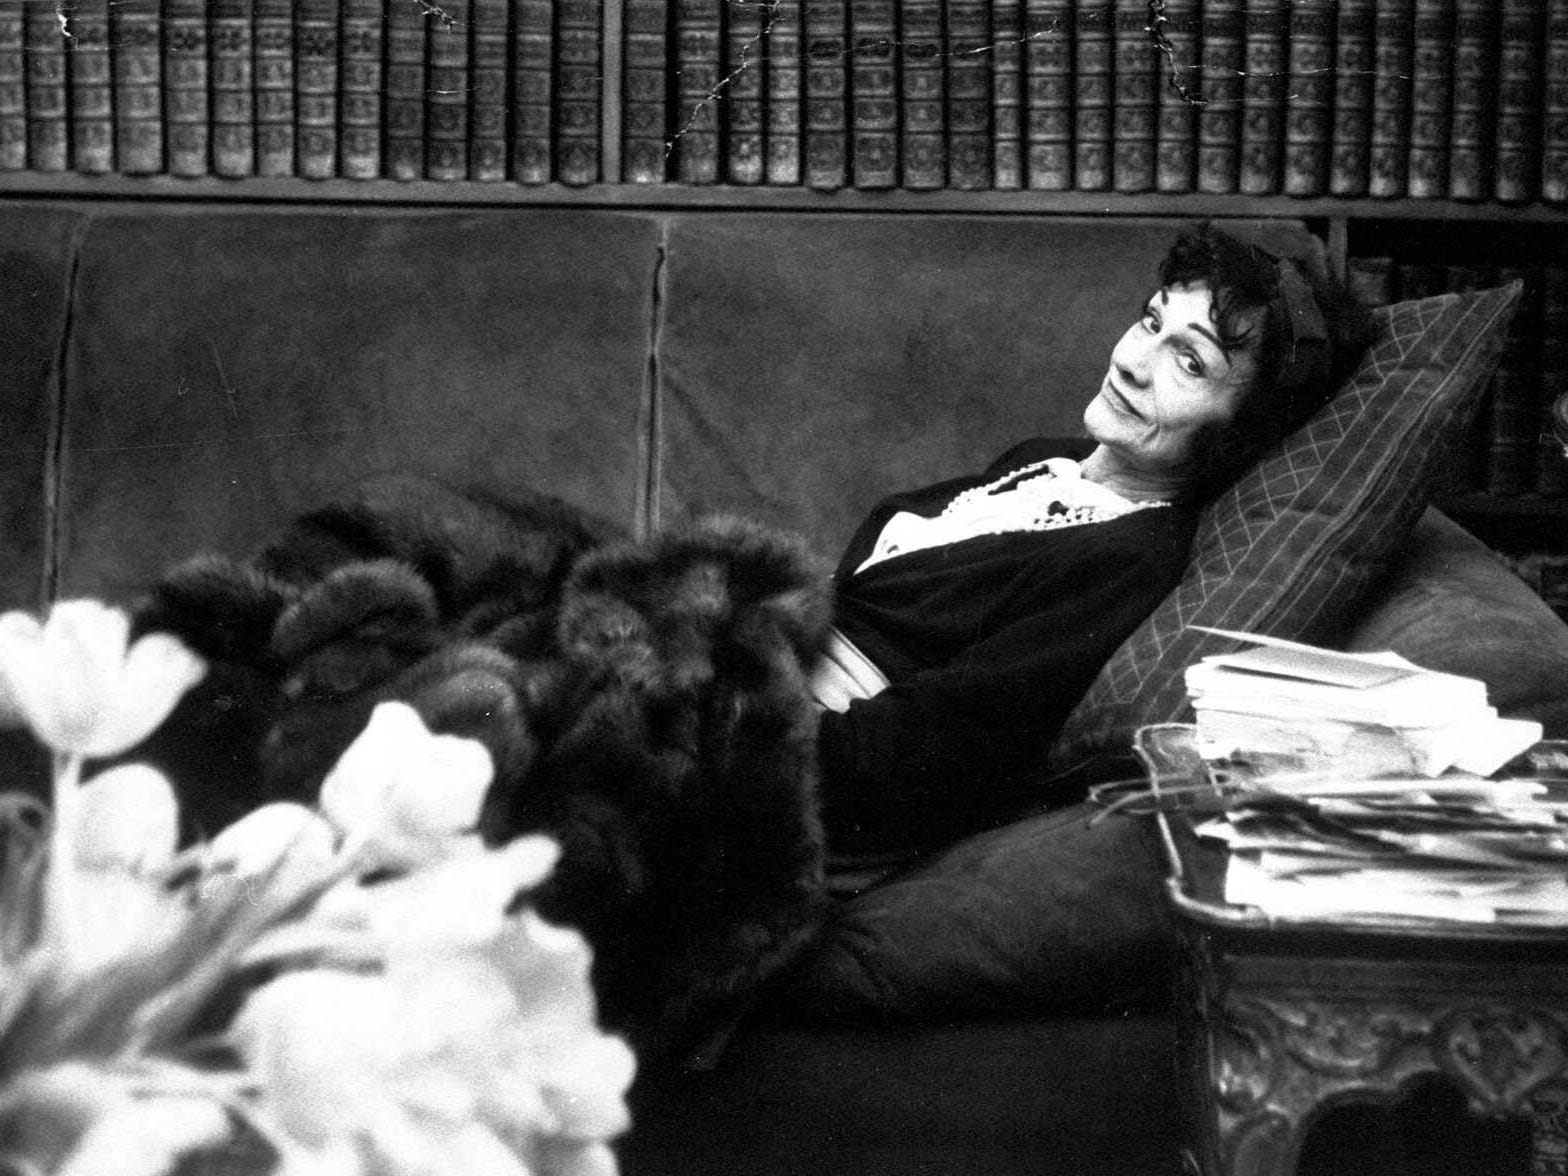 Coco Chanel lounging on a couch in front of bookshelves